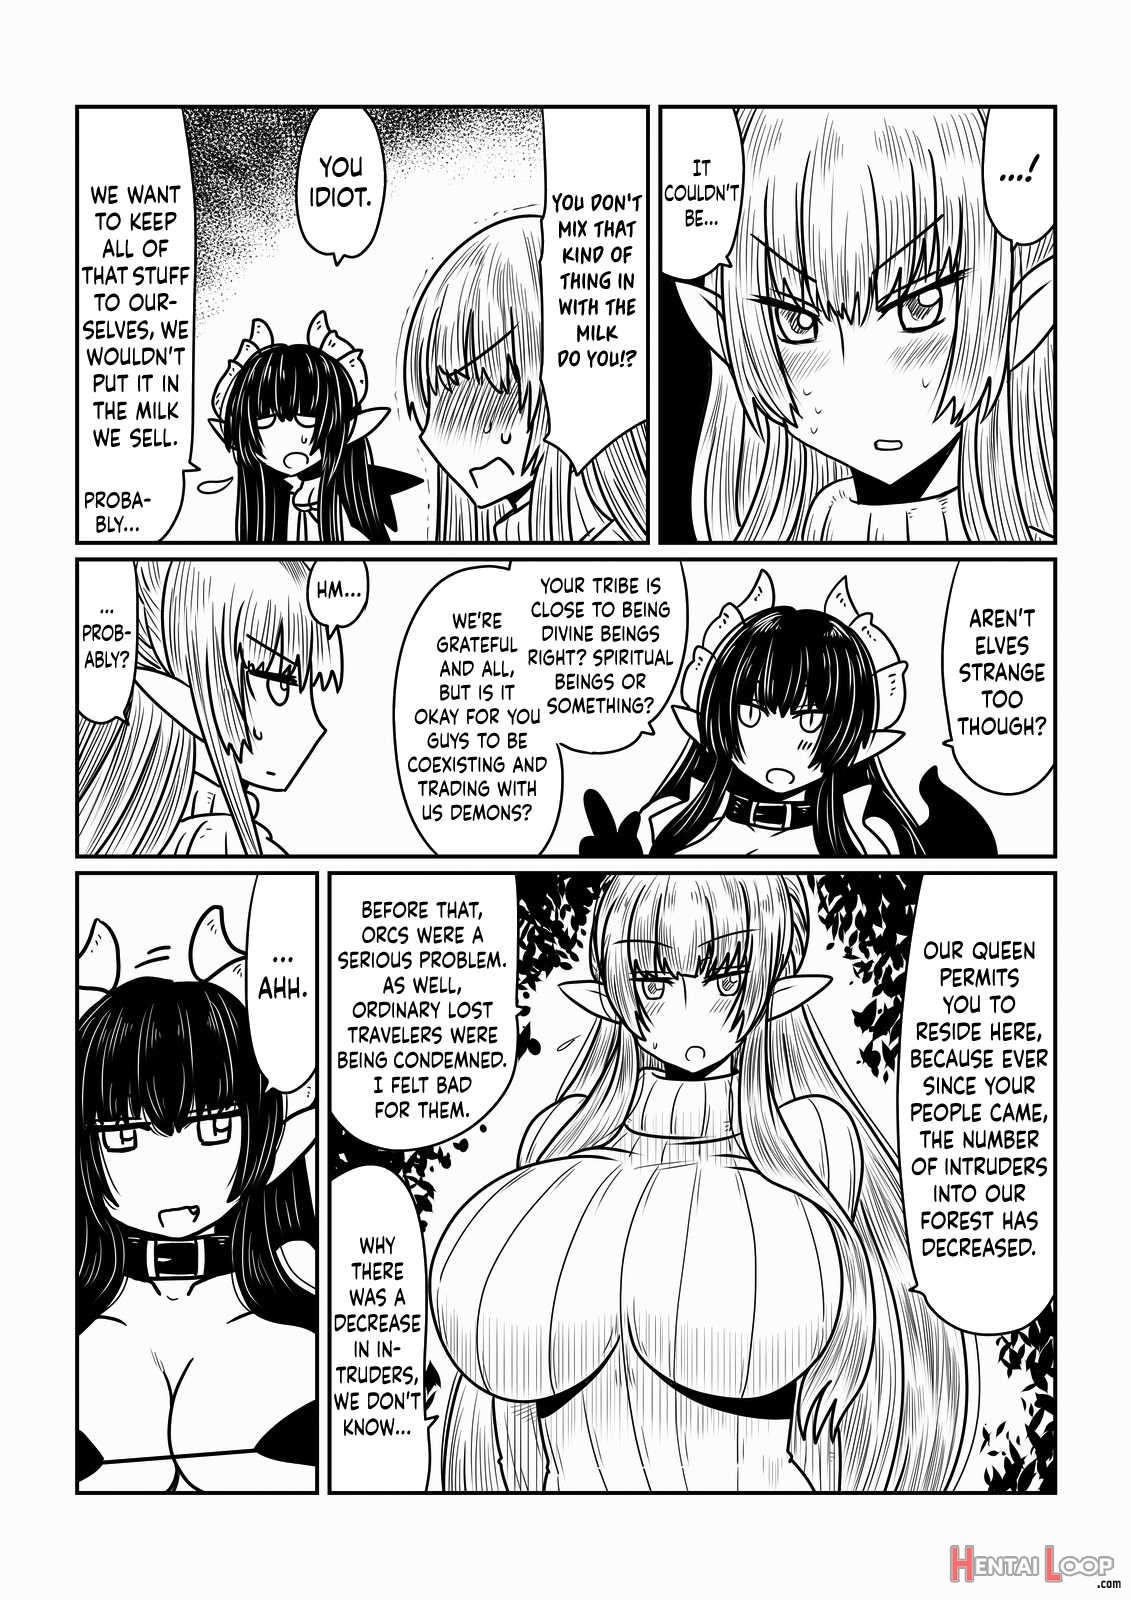 An Elf And A Succubus. page 4